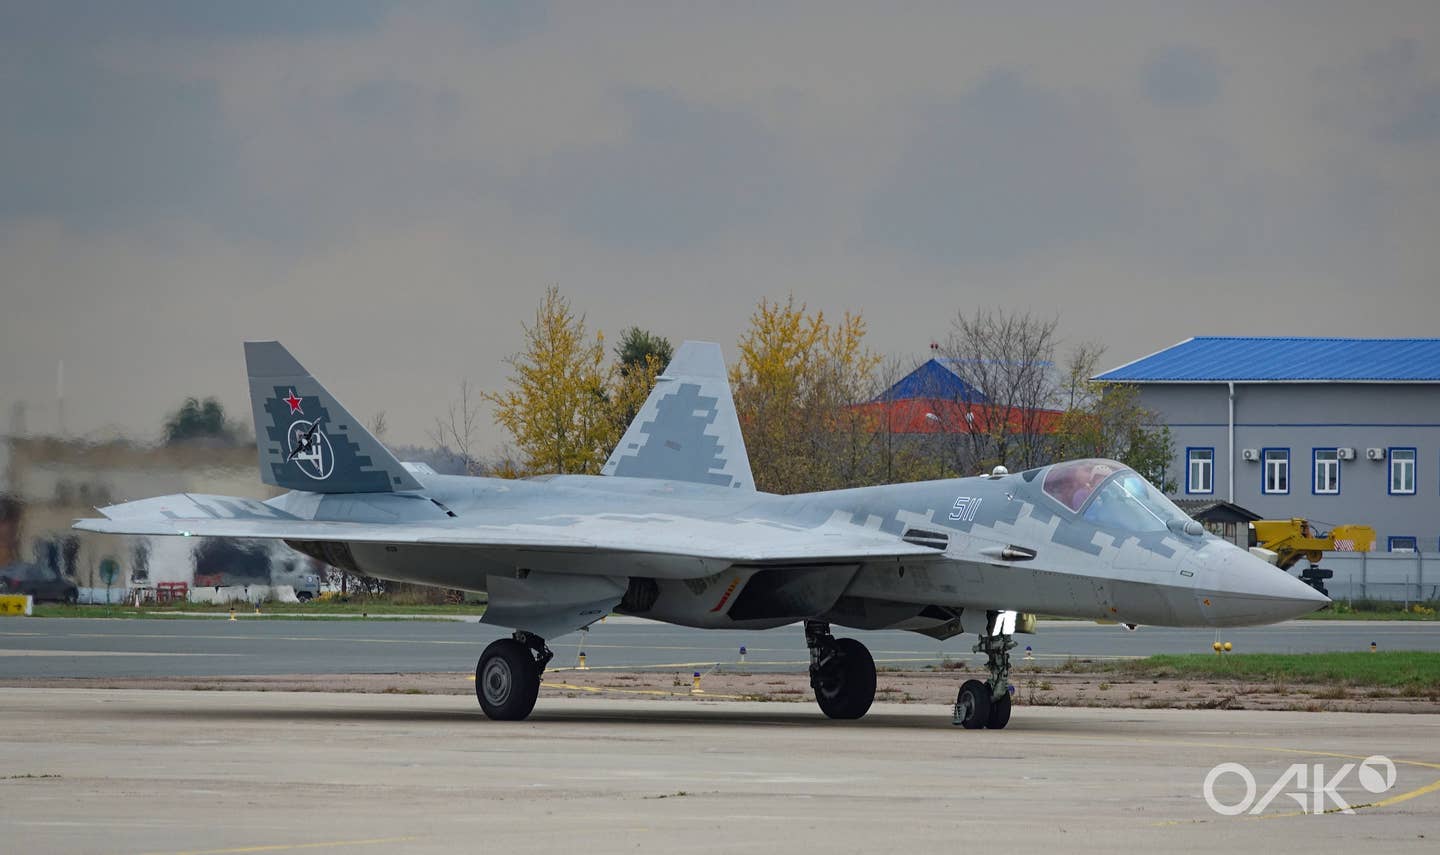 The test aircraft T-50-11 ready for its first flight after its upgrade, on October 21, 2022. The aircraft has modernized equipment and is able to be fitted with new izdeliye 30 engines in the future. <em>United Aircraft Corporation</em>